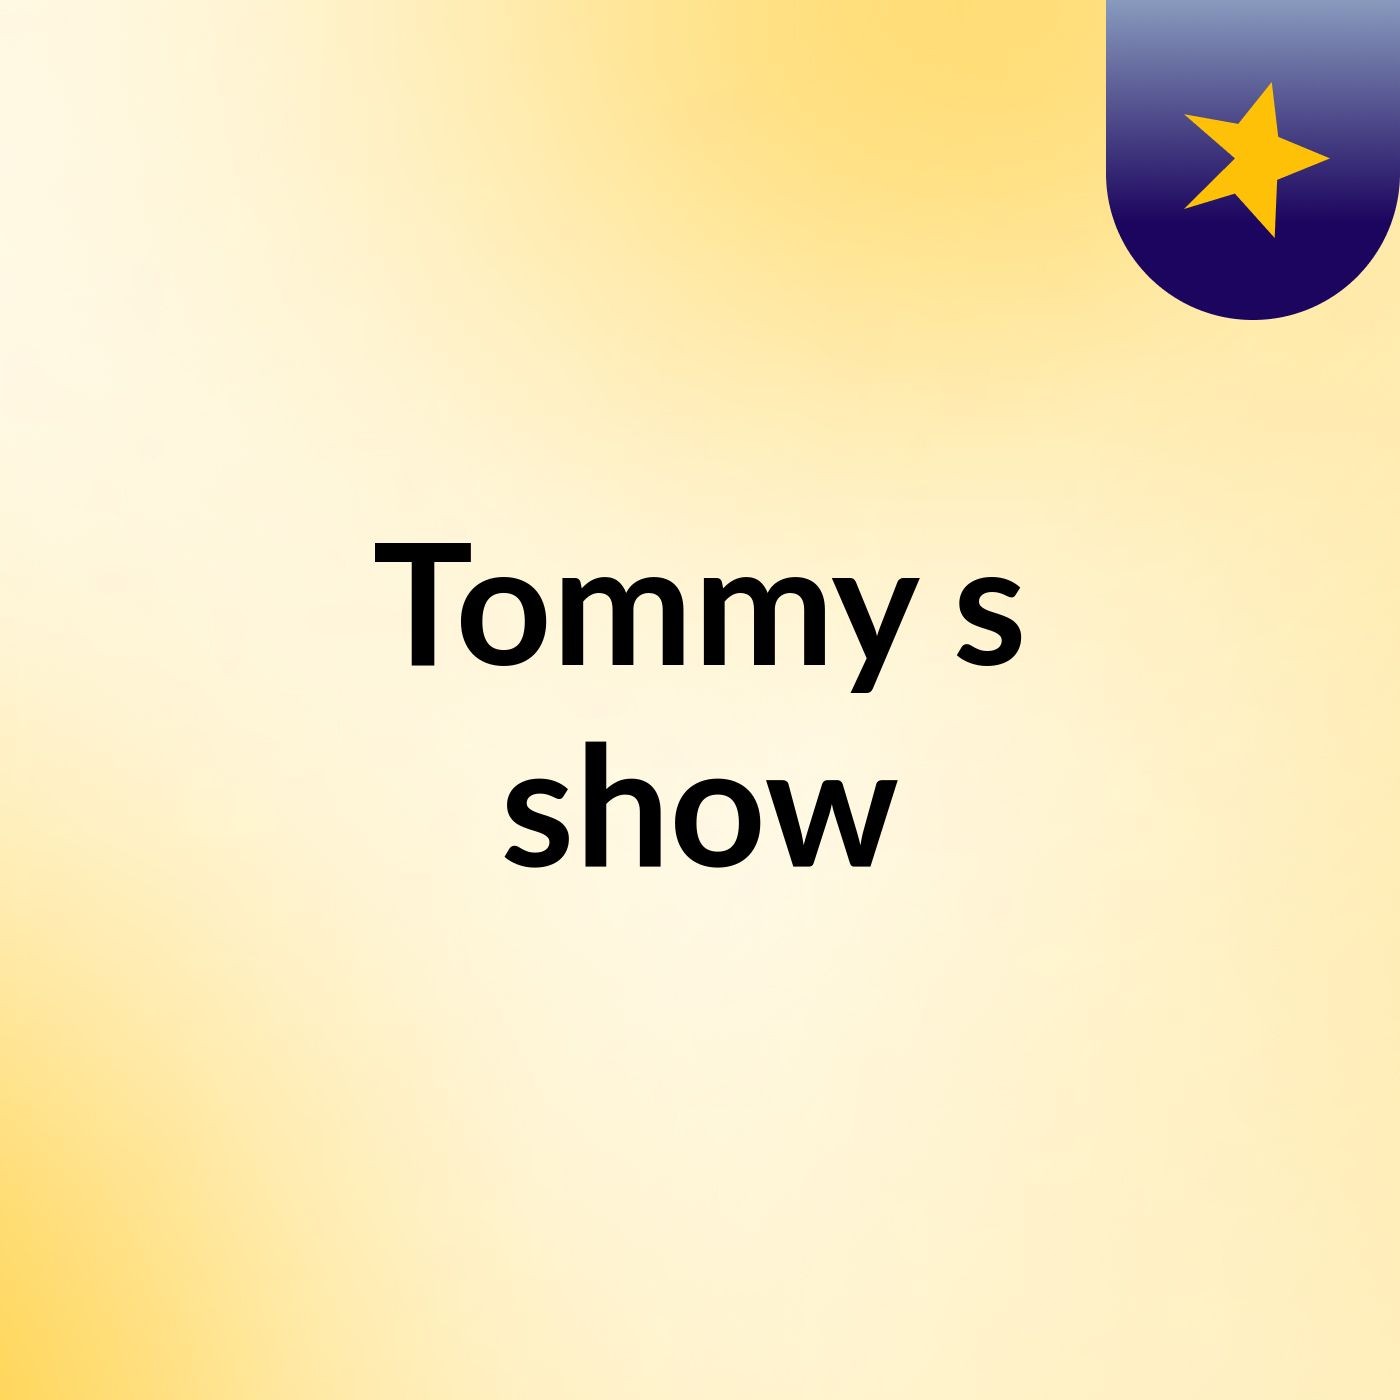 Tommy's show